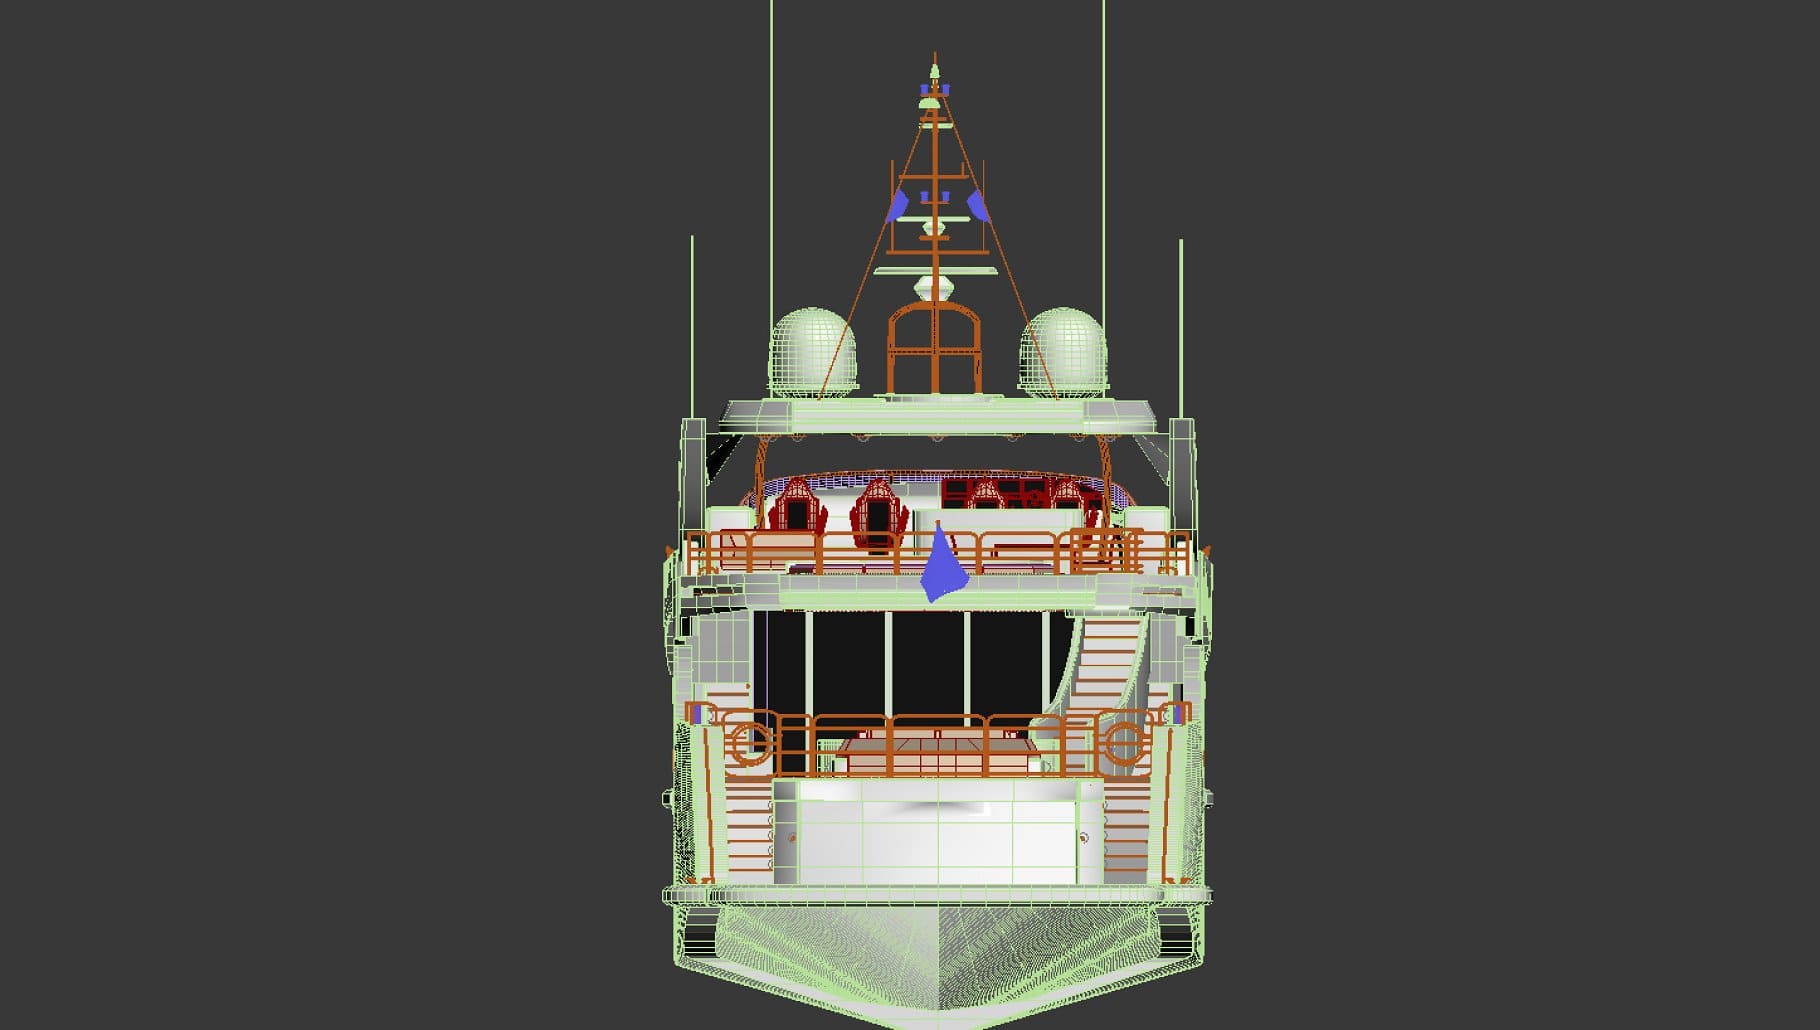 Rear view of the Sunseeker predator 130 white Superyacht model in the graphics editor.